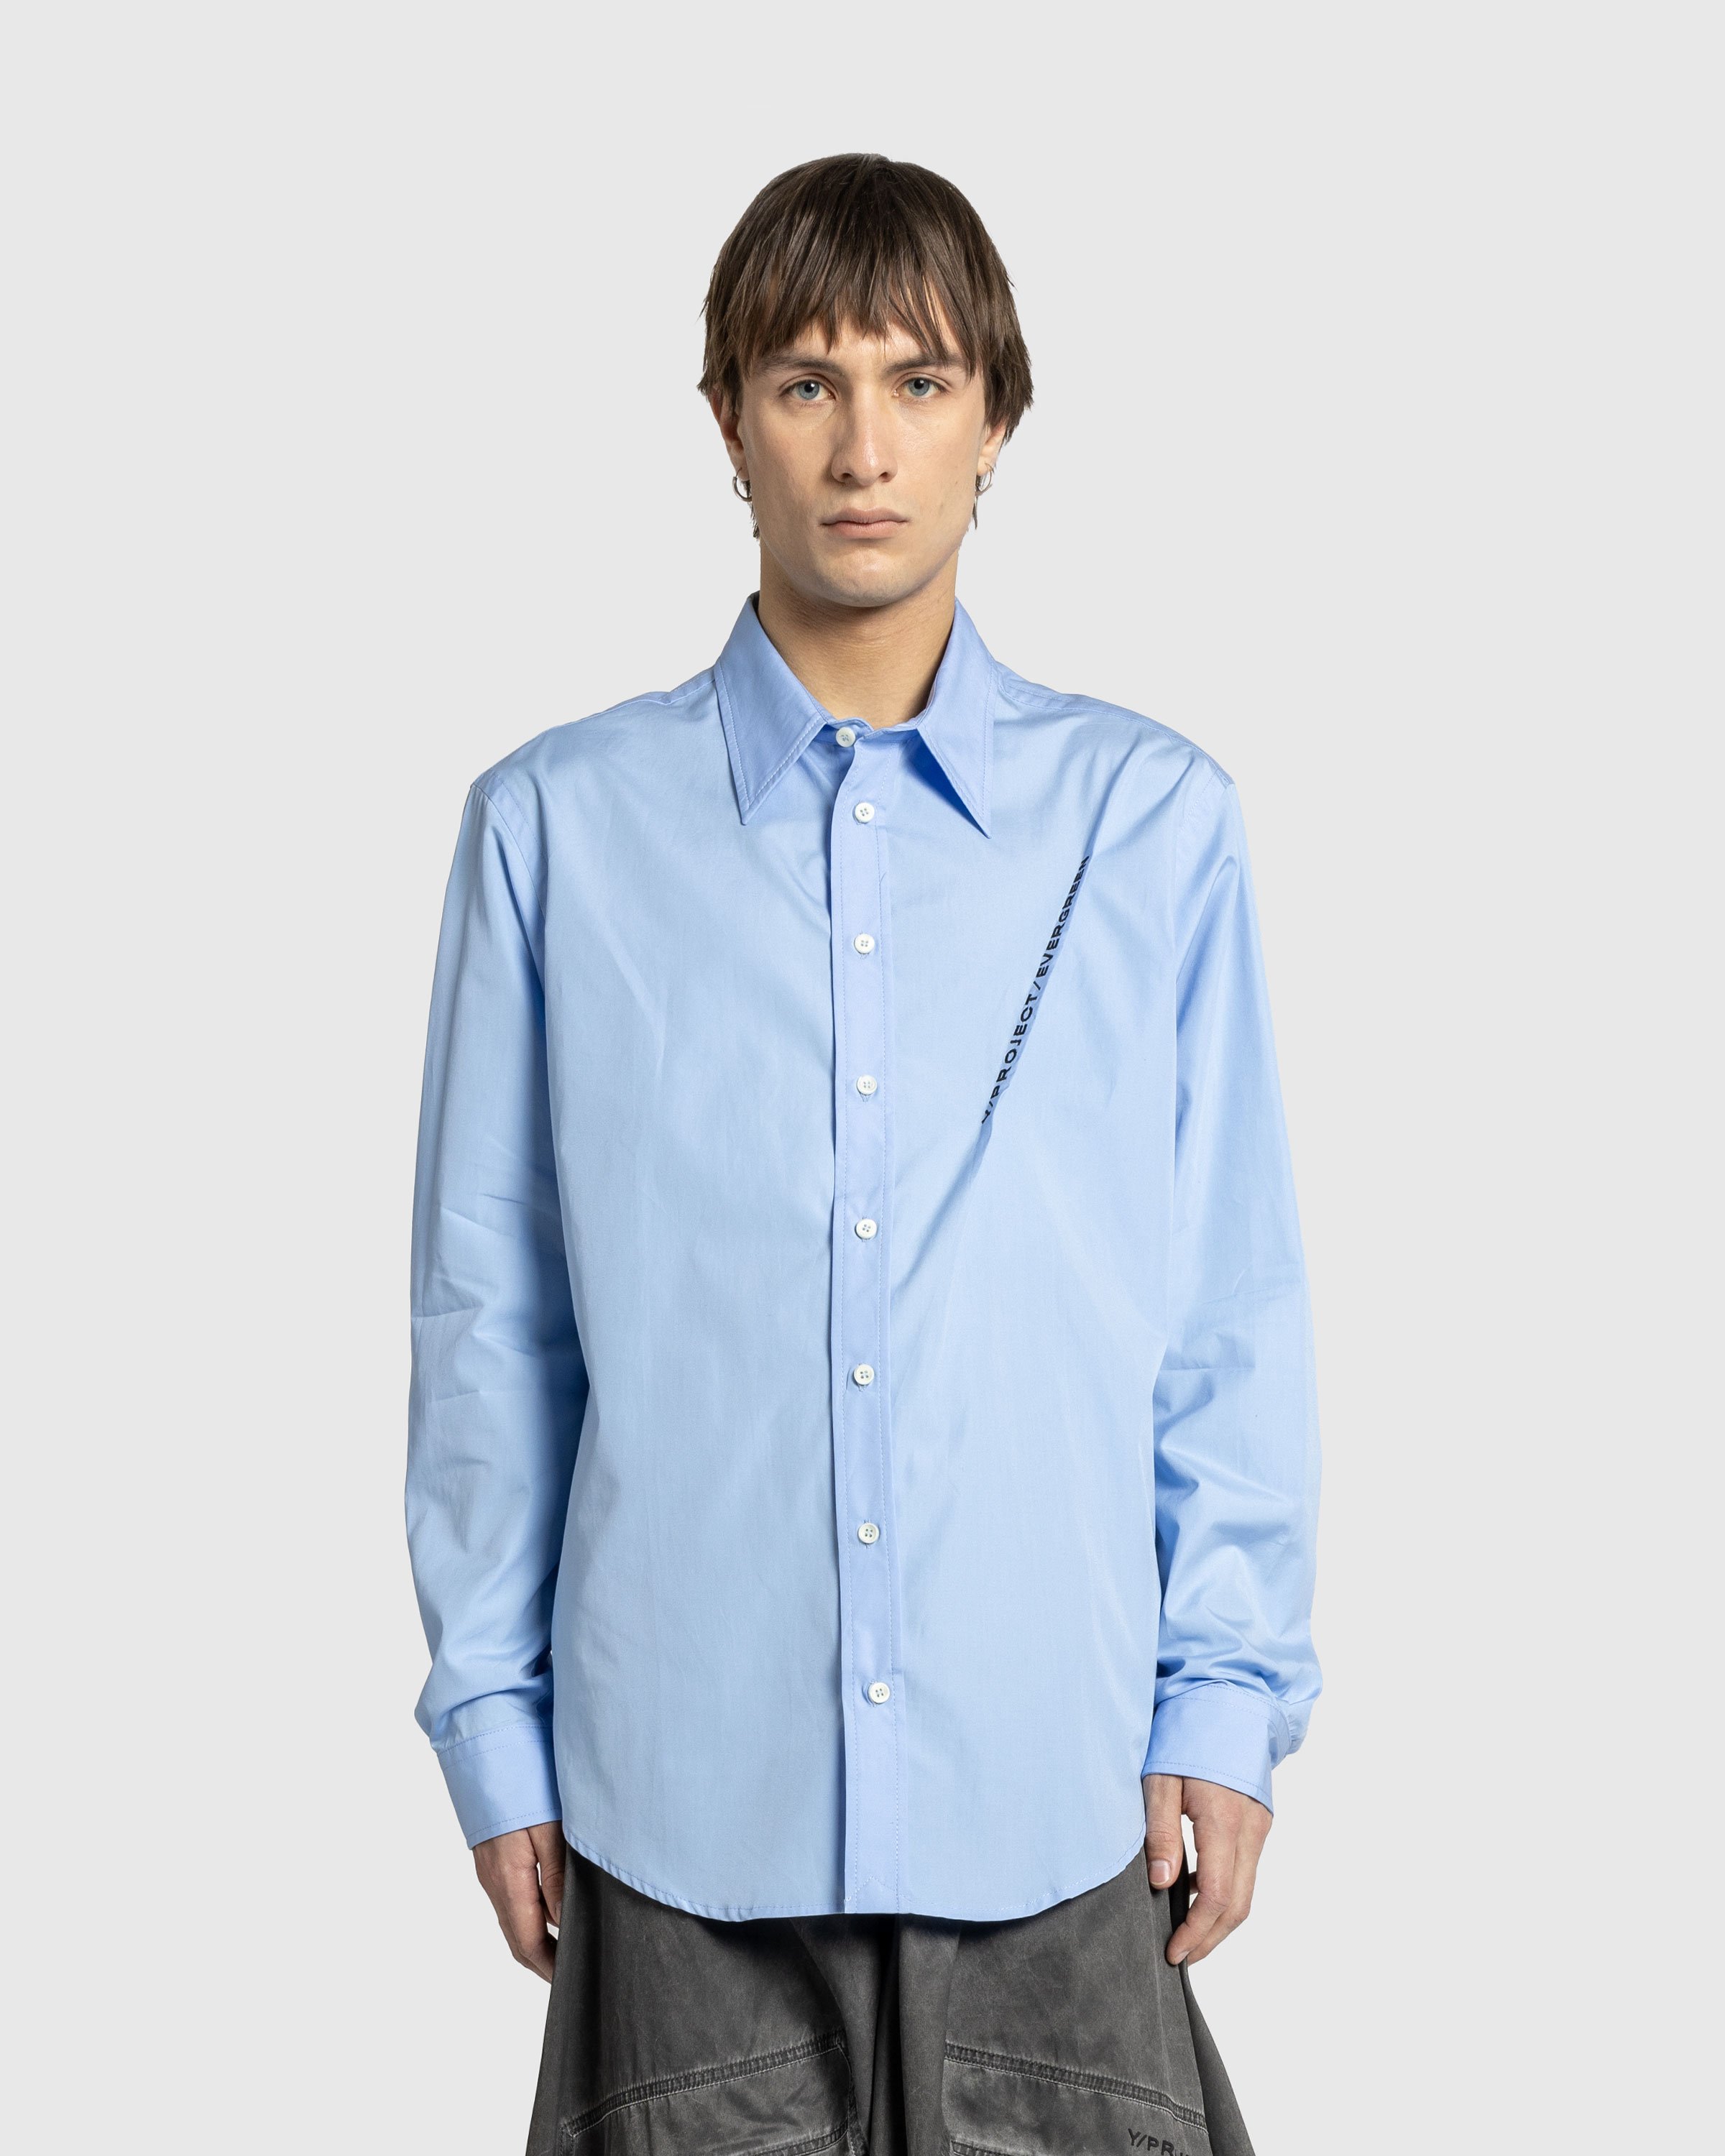 Y/Project - Evergreen Pinched Logo Shirt Light Blue - Clothing - Blue - Image 2